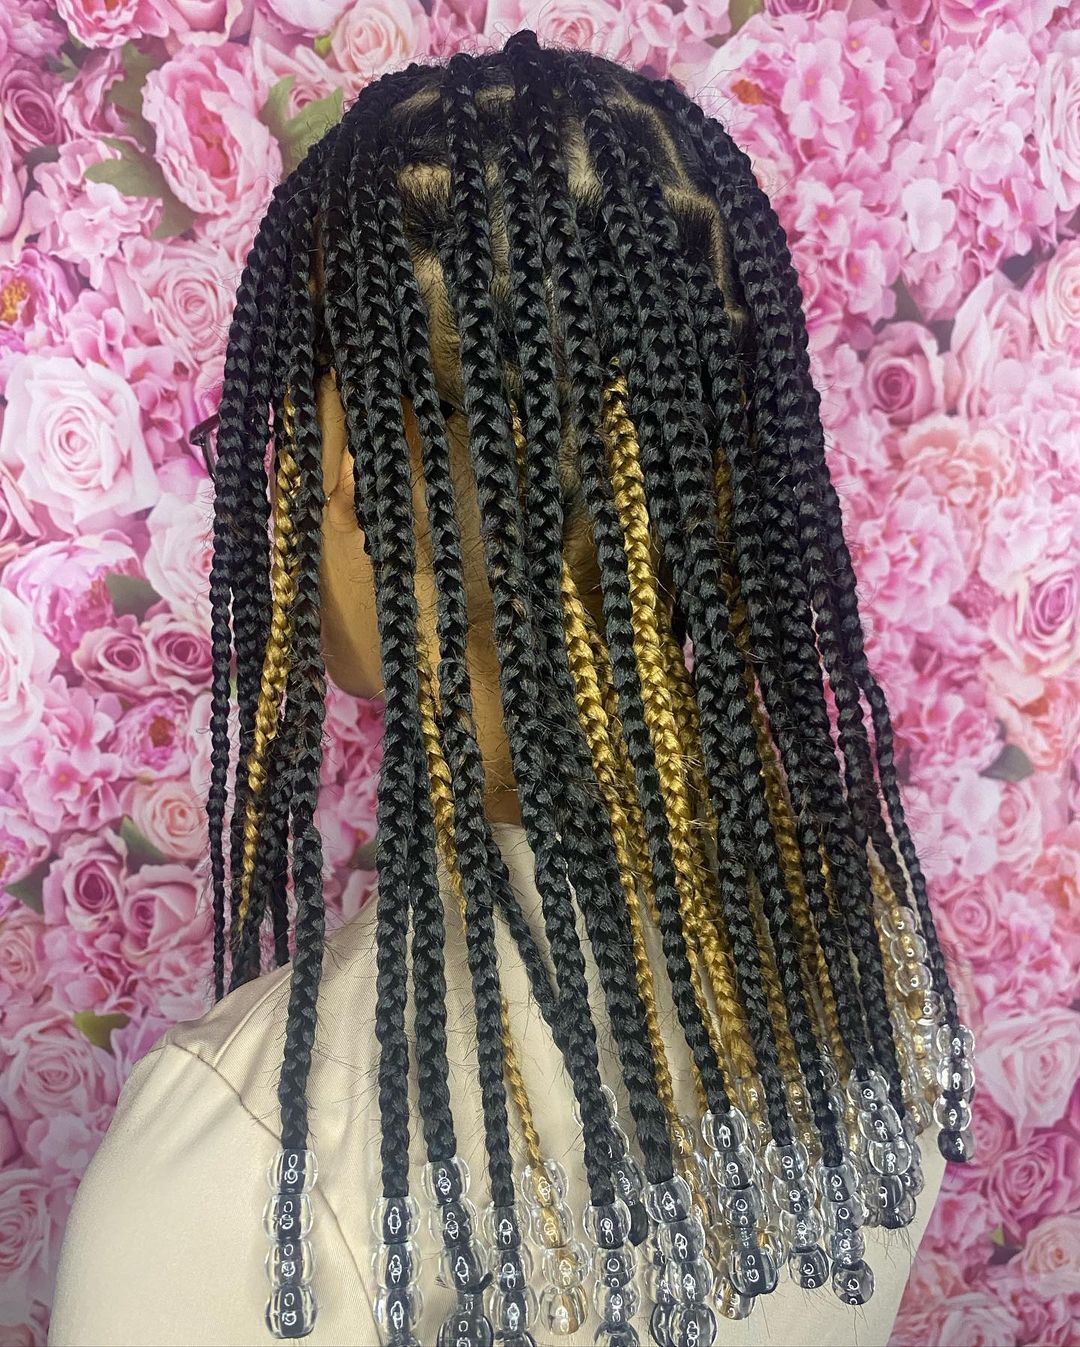 25. Black And Gold shoulder-length knotless Braids With Water Beads